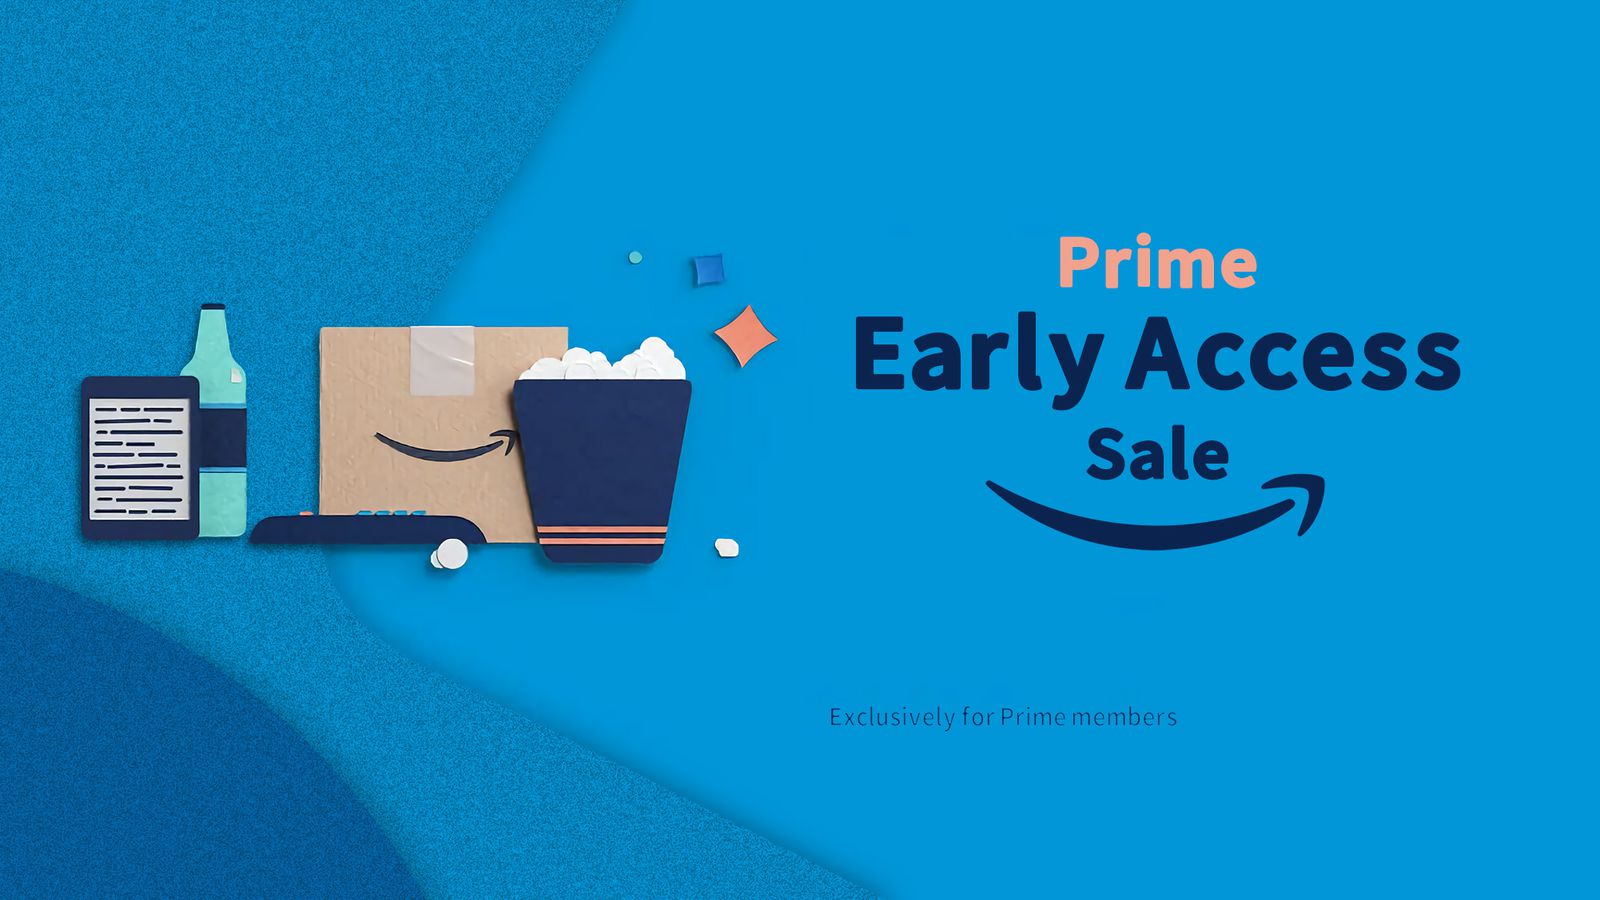 Prime Early Access Sale 2022: Best Deals for Prime Members